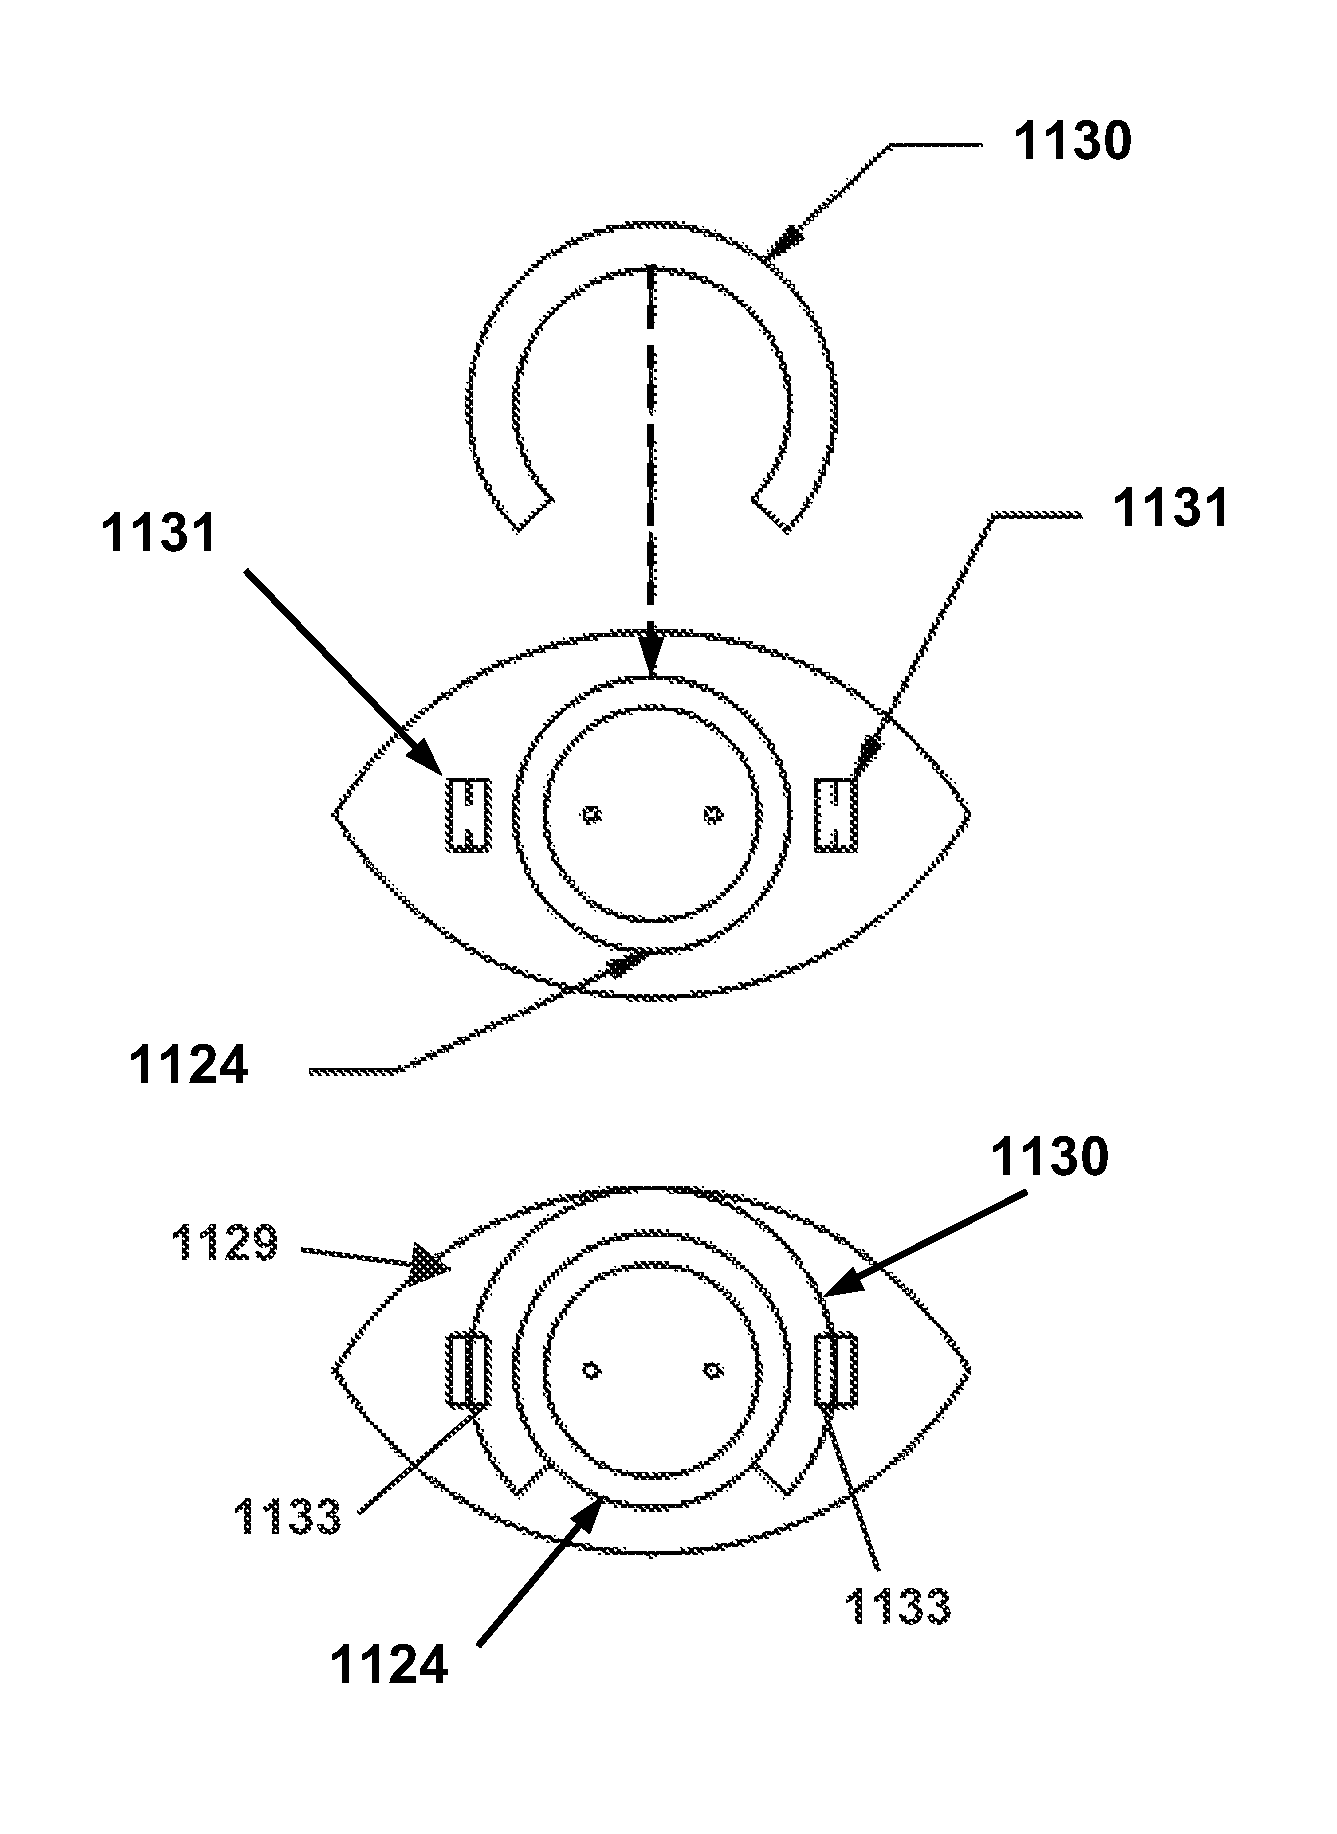 Lighting apparatus with reflector rotatably coupled to an adapter